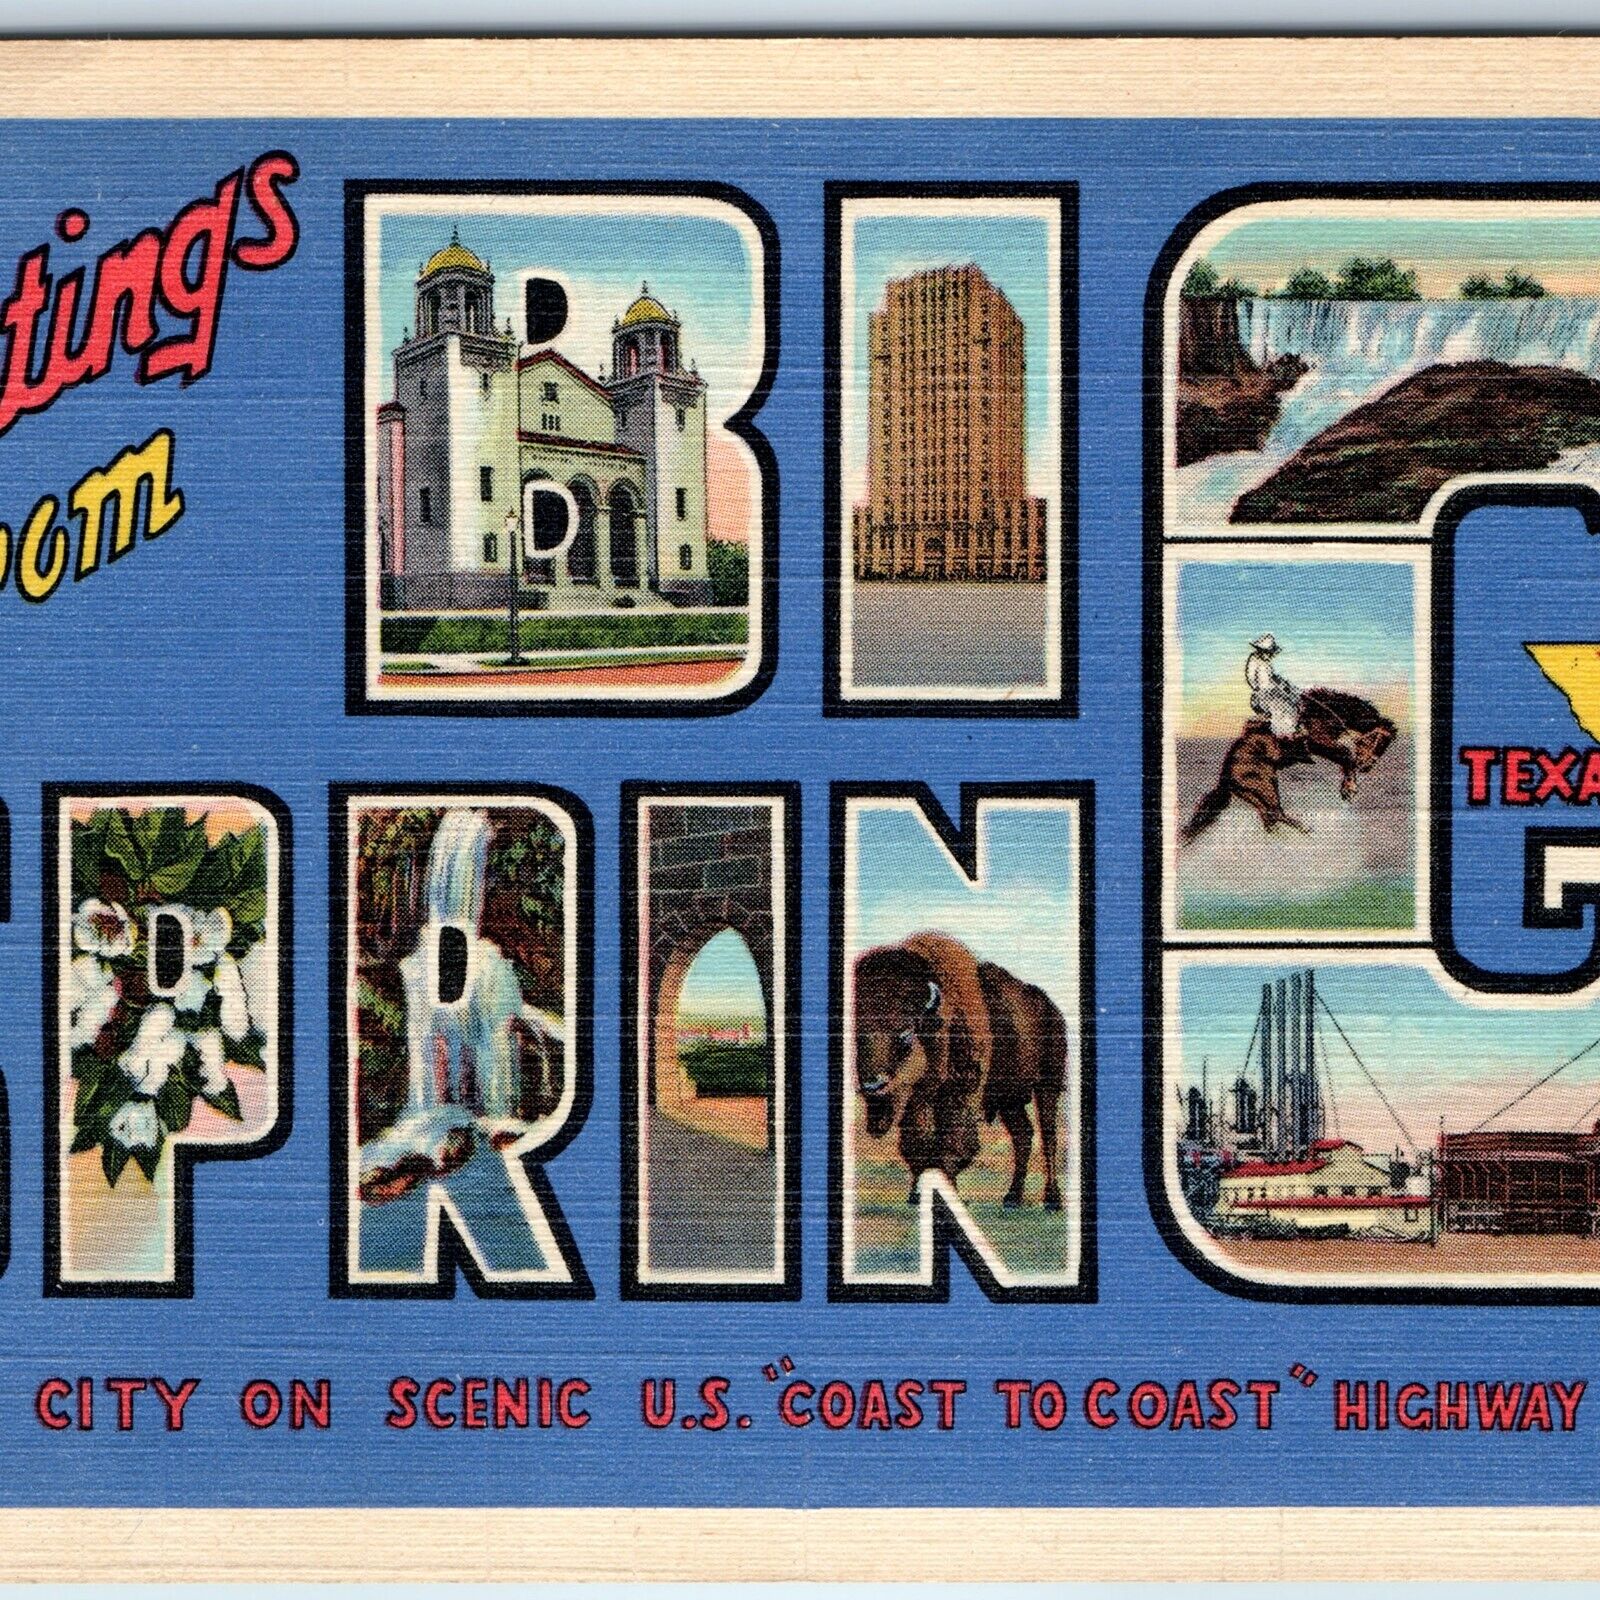 1939 Big Springs, TX Greetings Large Bubble Letter Tex Cowboy Refinery PC A249